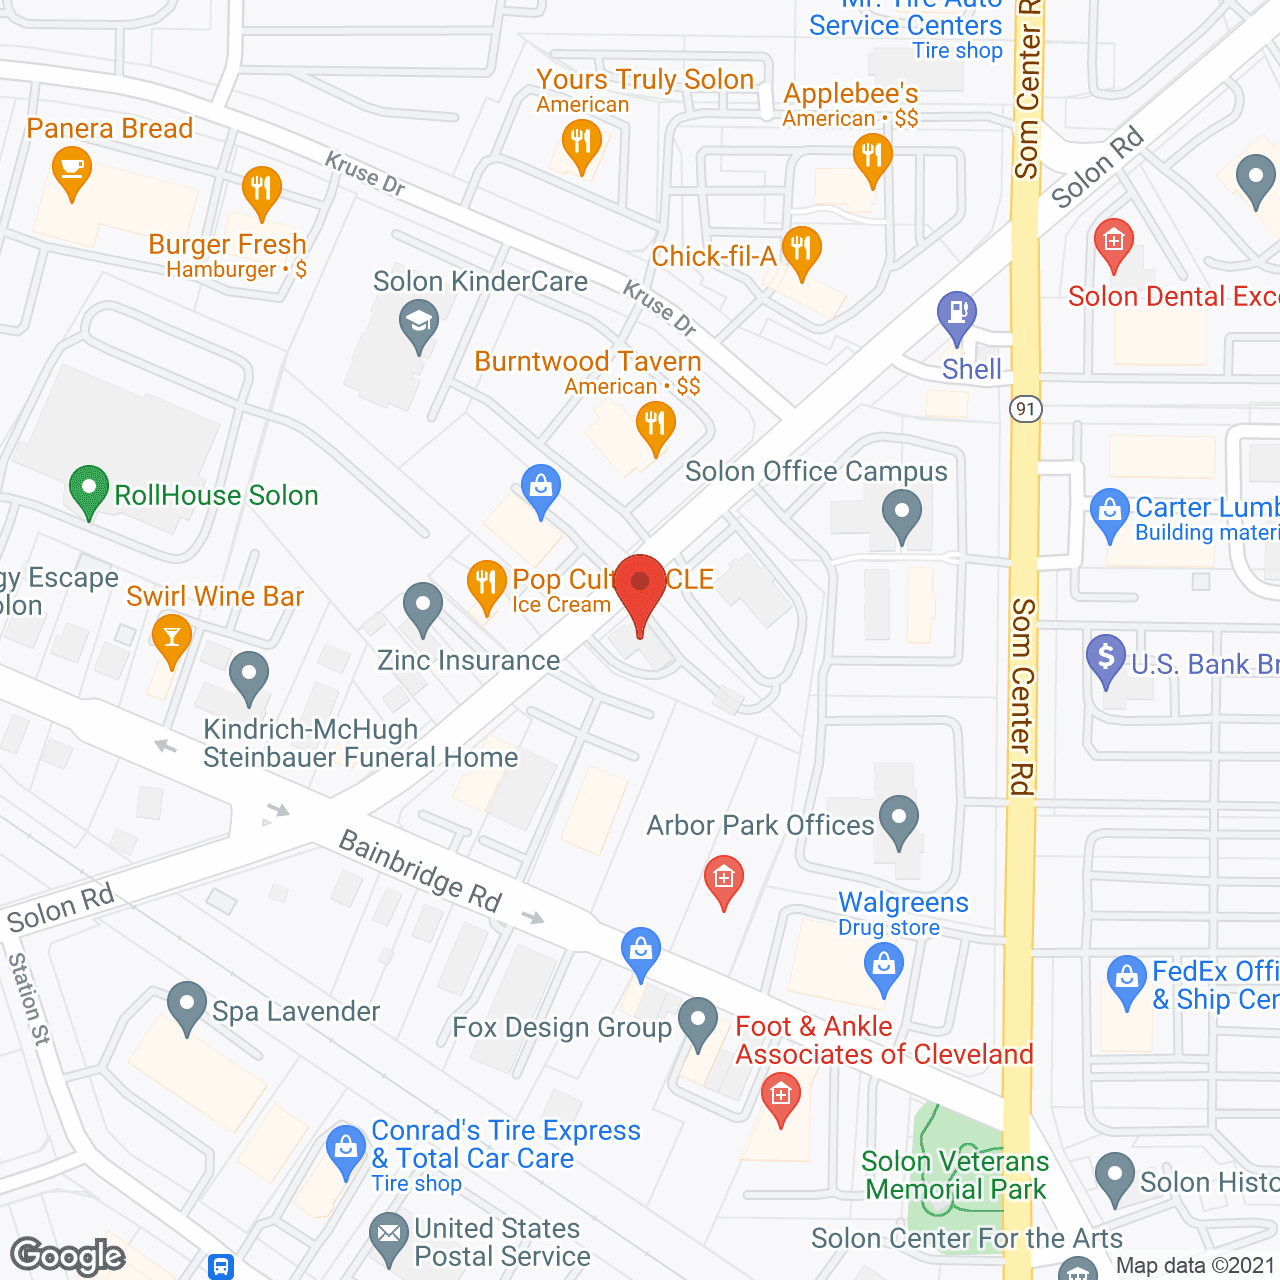 Family Tree Home Care Services in google map